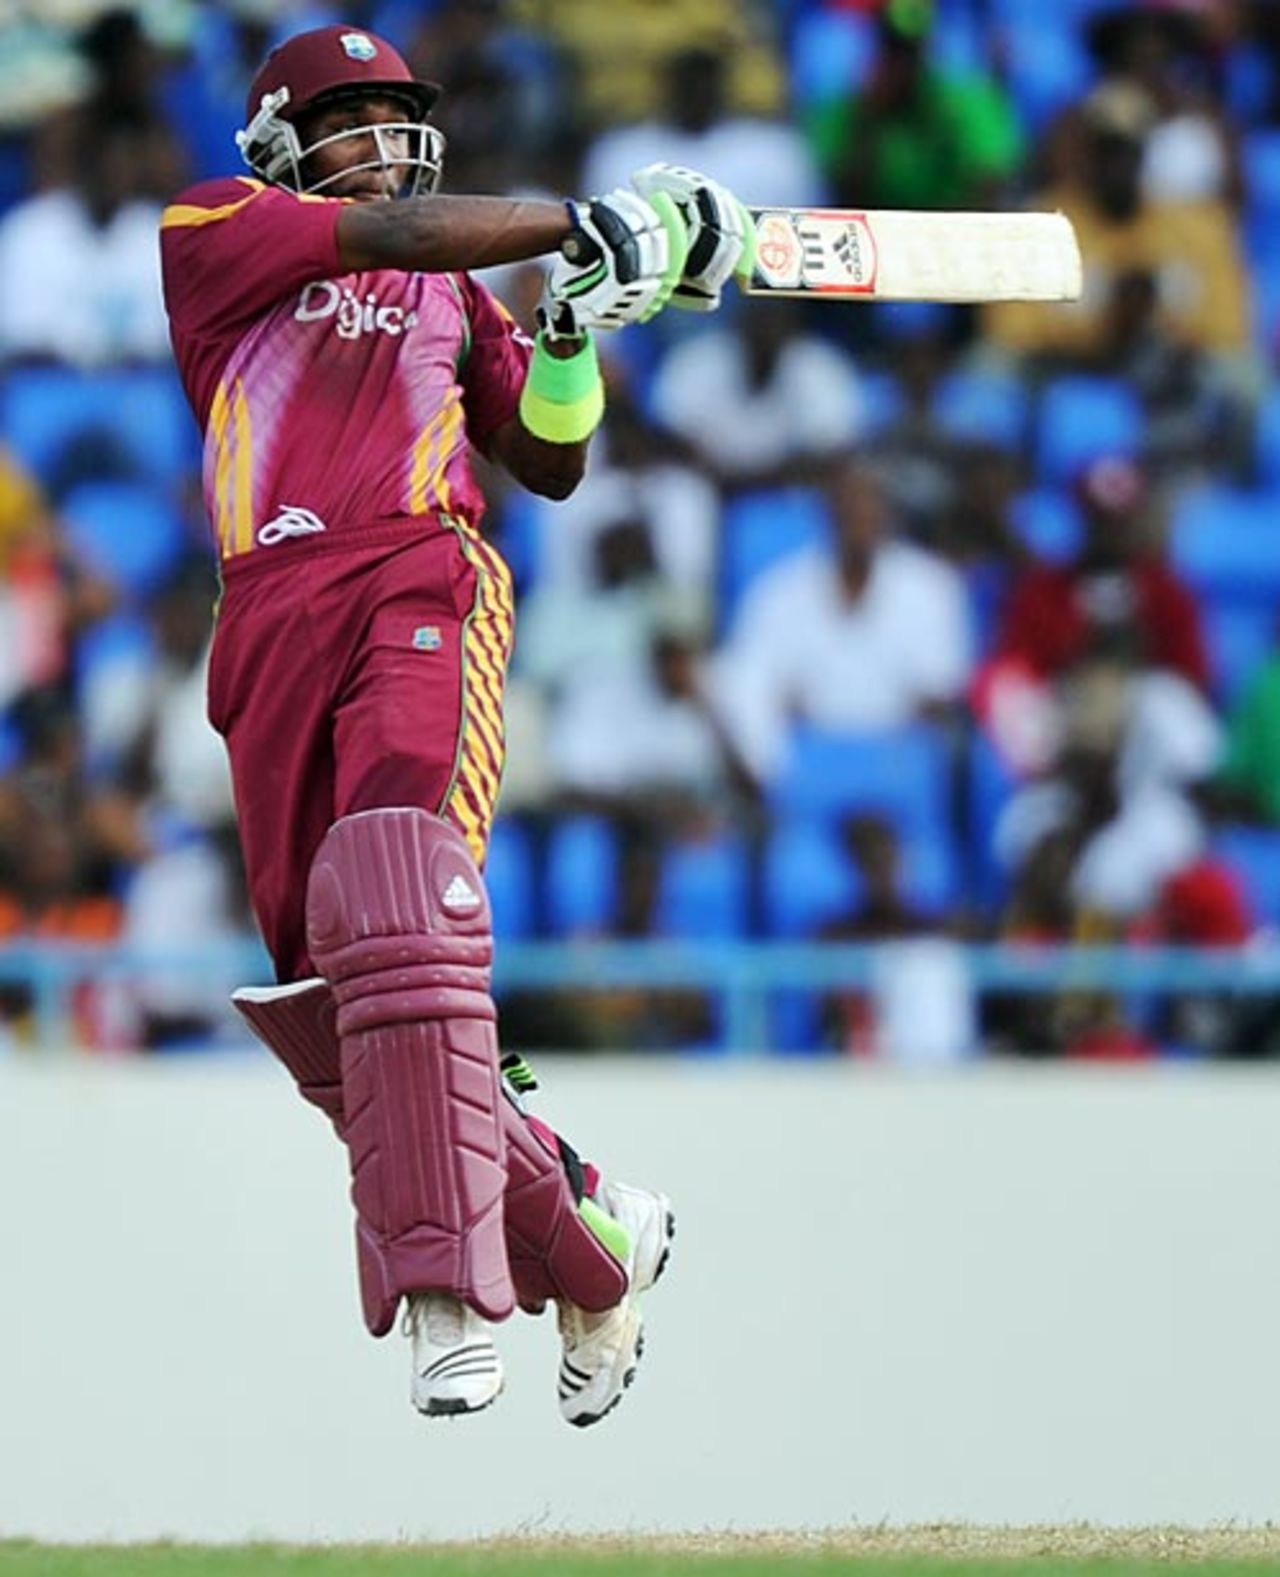 Dwayne Bravo pulls with feet off the ground, West Indies v South Africa, 2nd ODI, Antigua, May 24, 2010